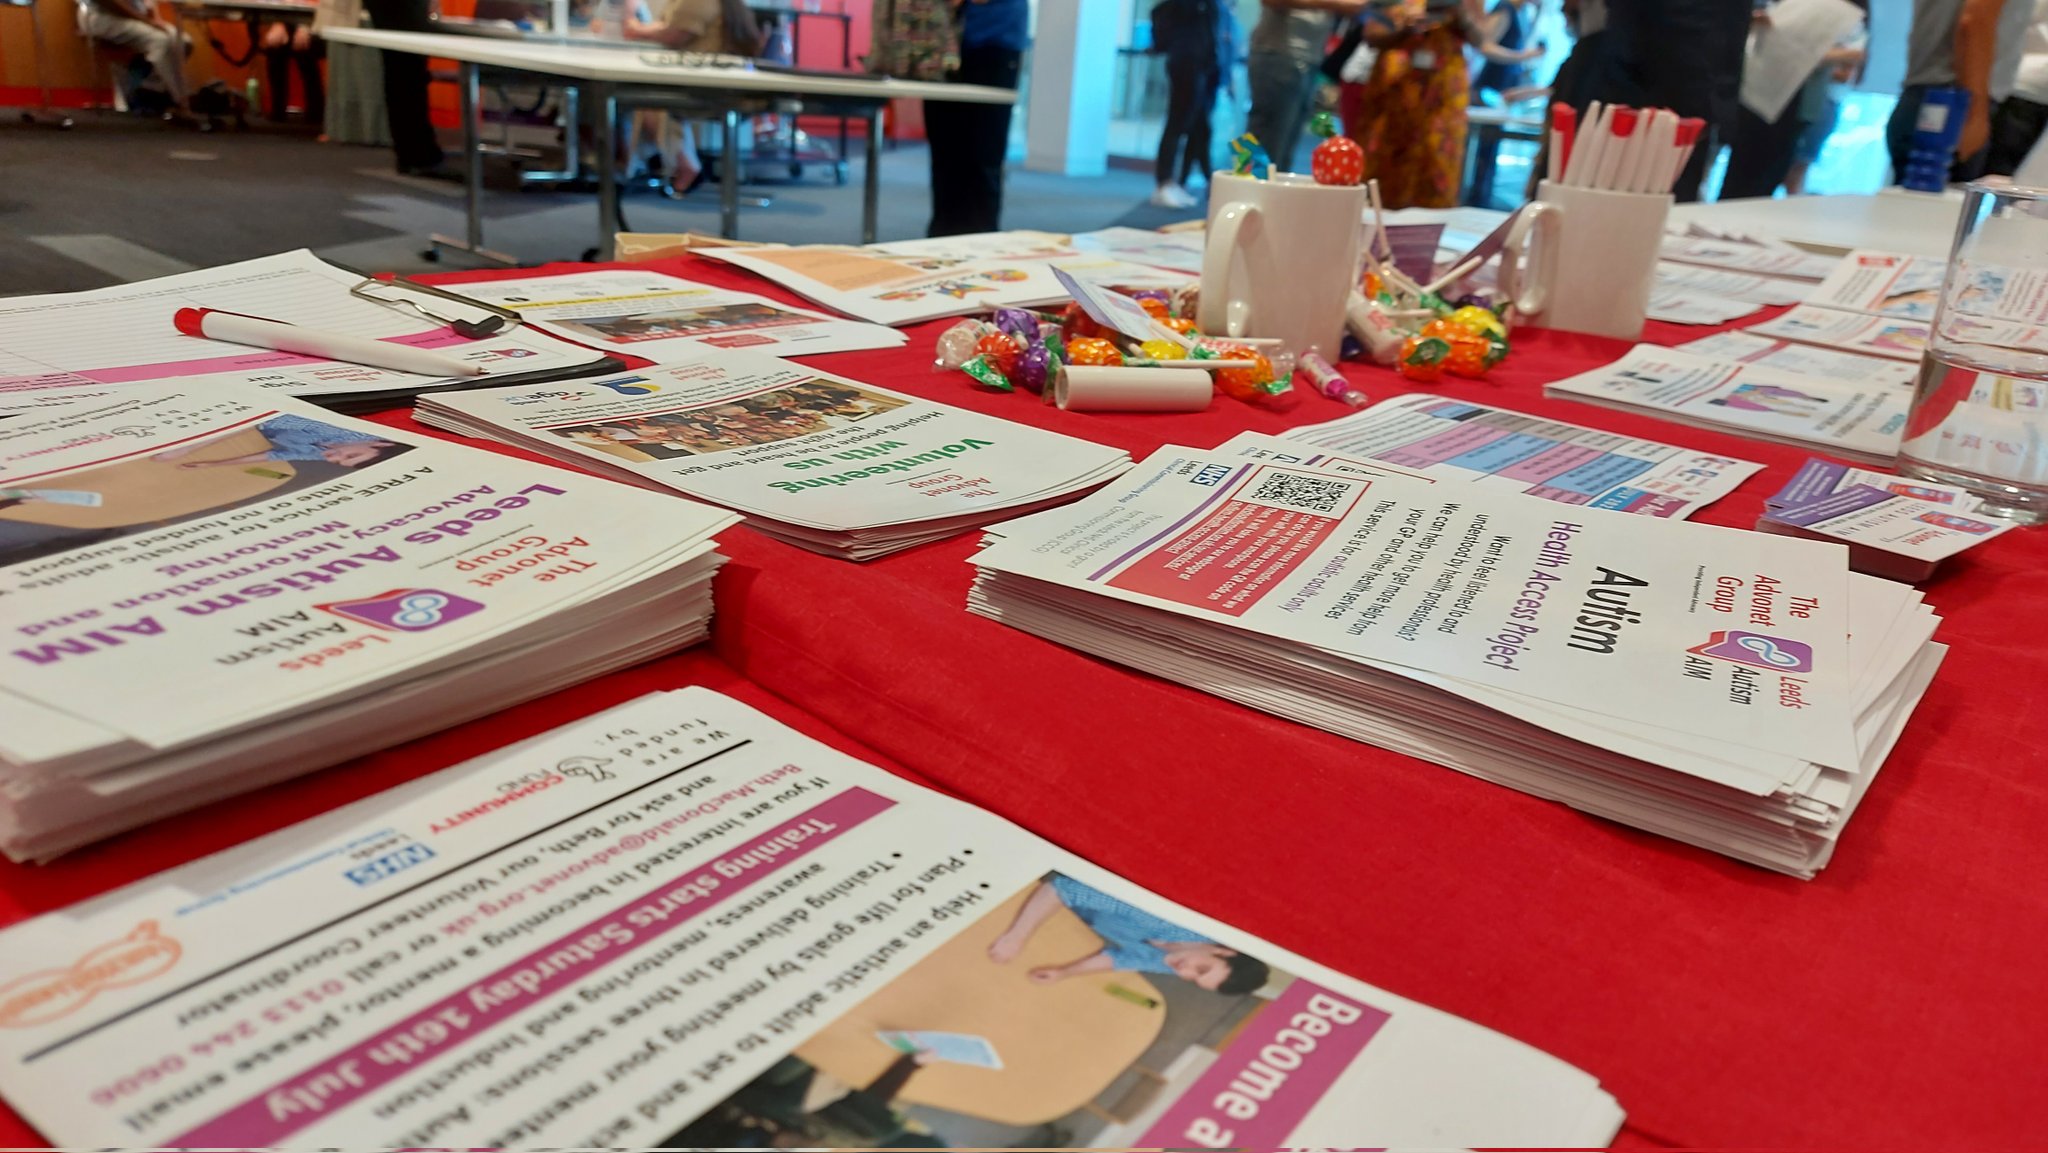 A photo of a table with a red tablecloth on it. On top of the tablecloth, there are leaflets and flyers for our Leeds Autism AIM service, as well as other leaflets and business cards, plus a couple of mugs with sweets and pens inside.